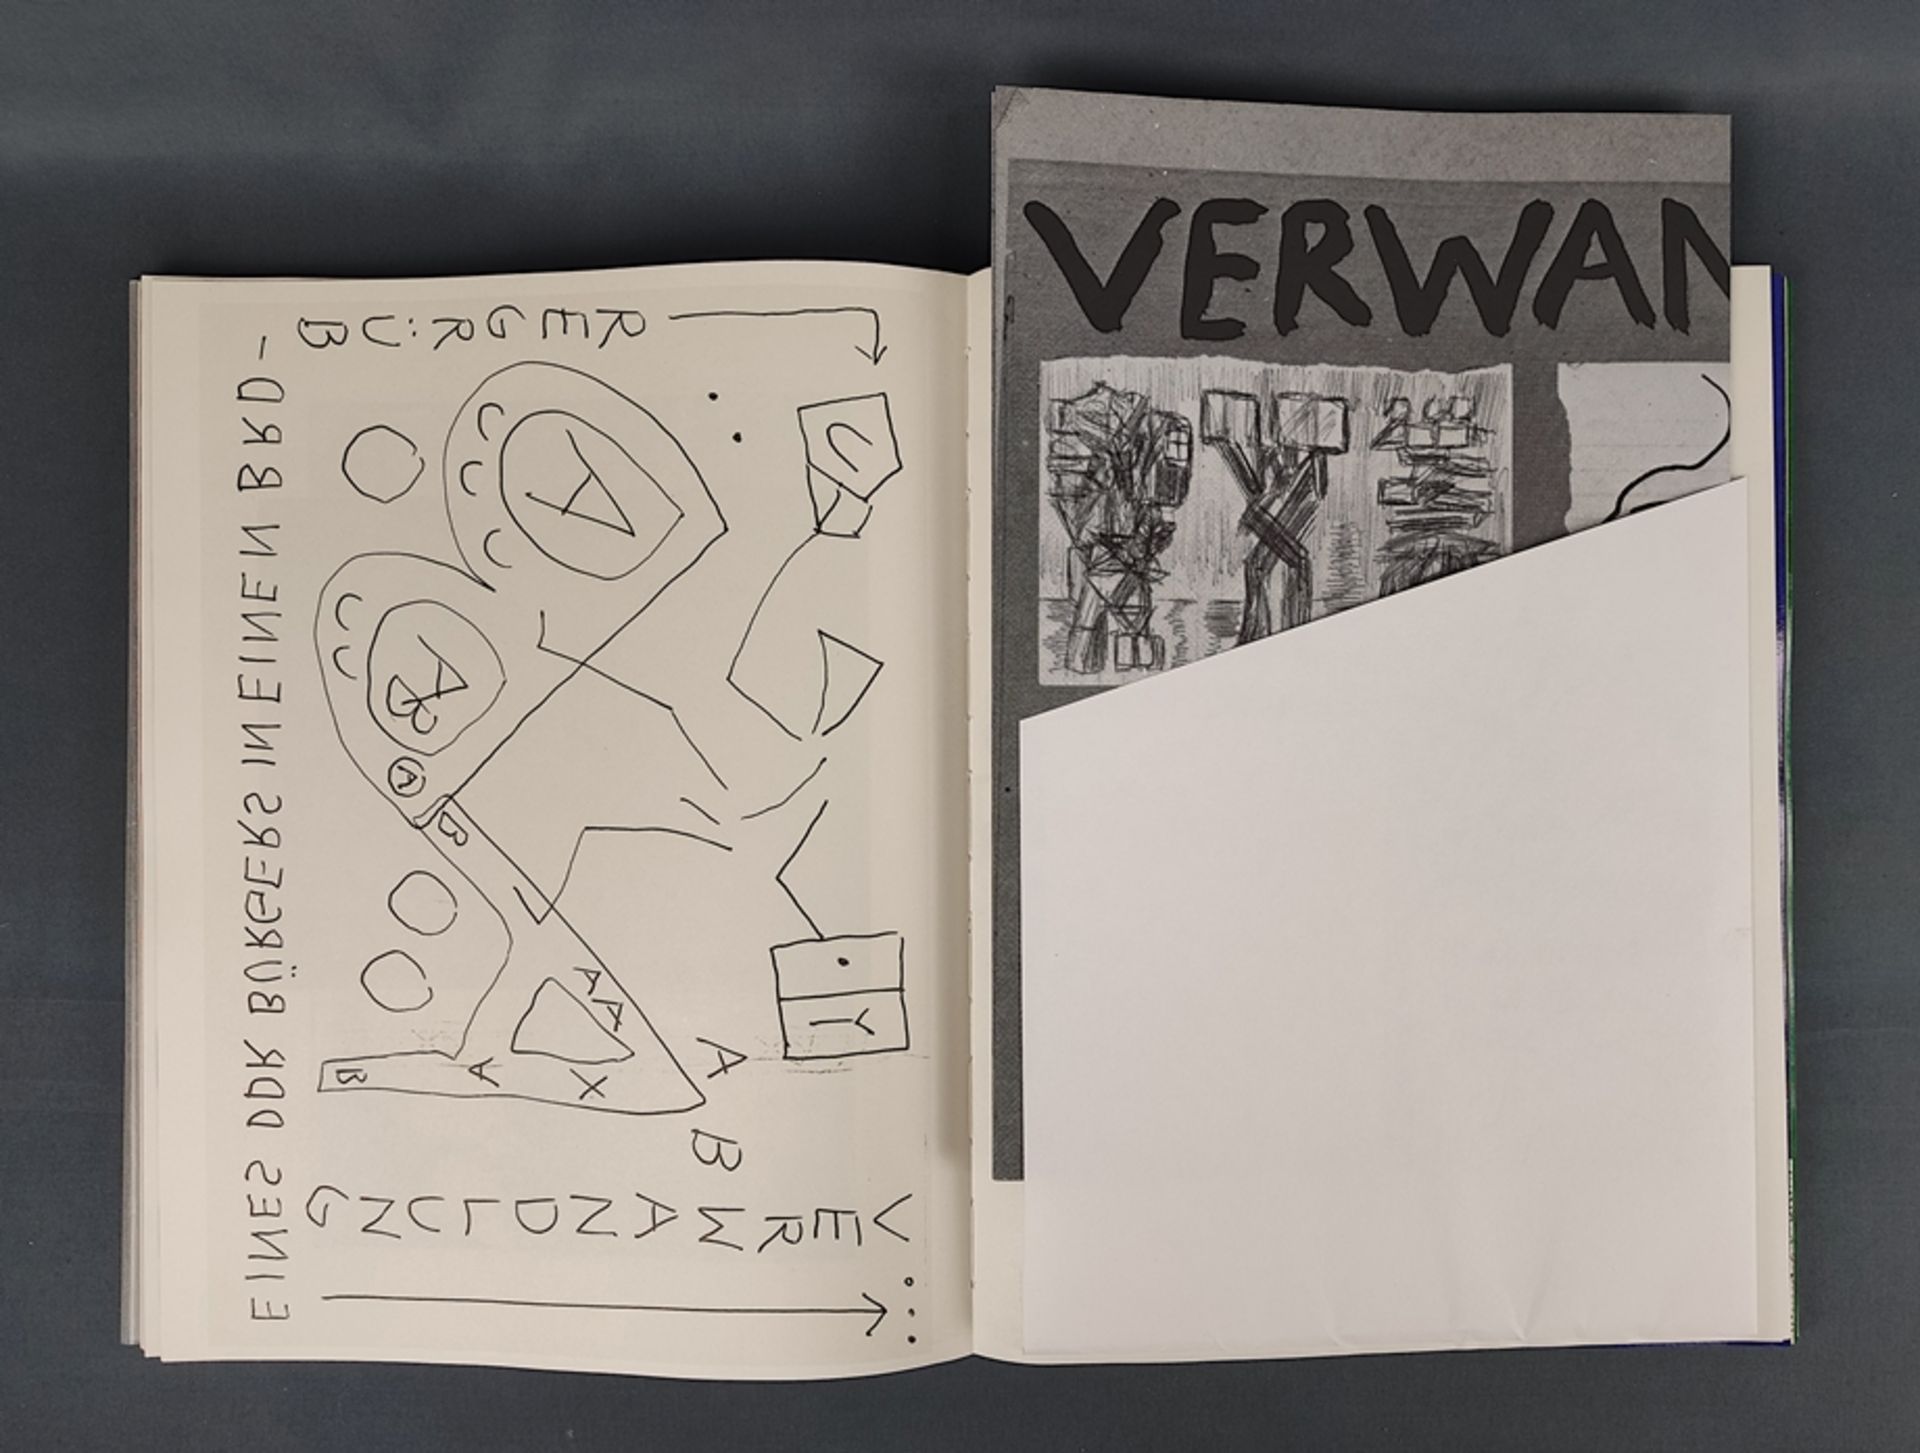 2 volumes "Krater und Wolke", consisting of no. 6 and no. 7, no. 6: Winkler, Ralf (A. R. Penck), ed - Image 3 of 12